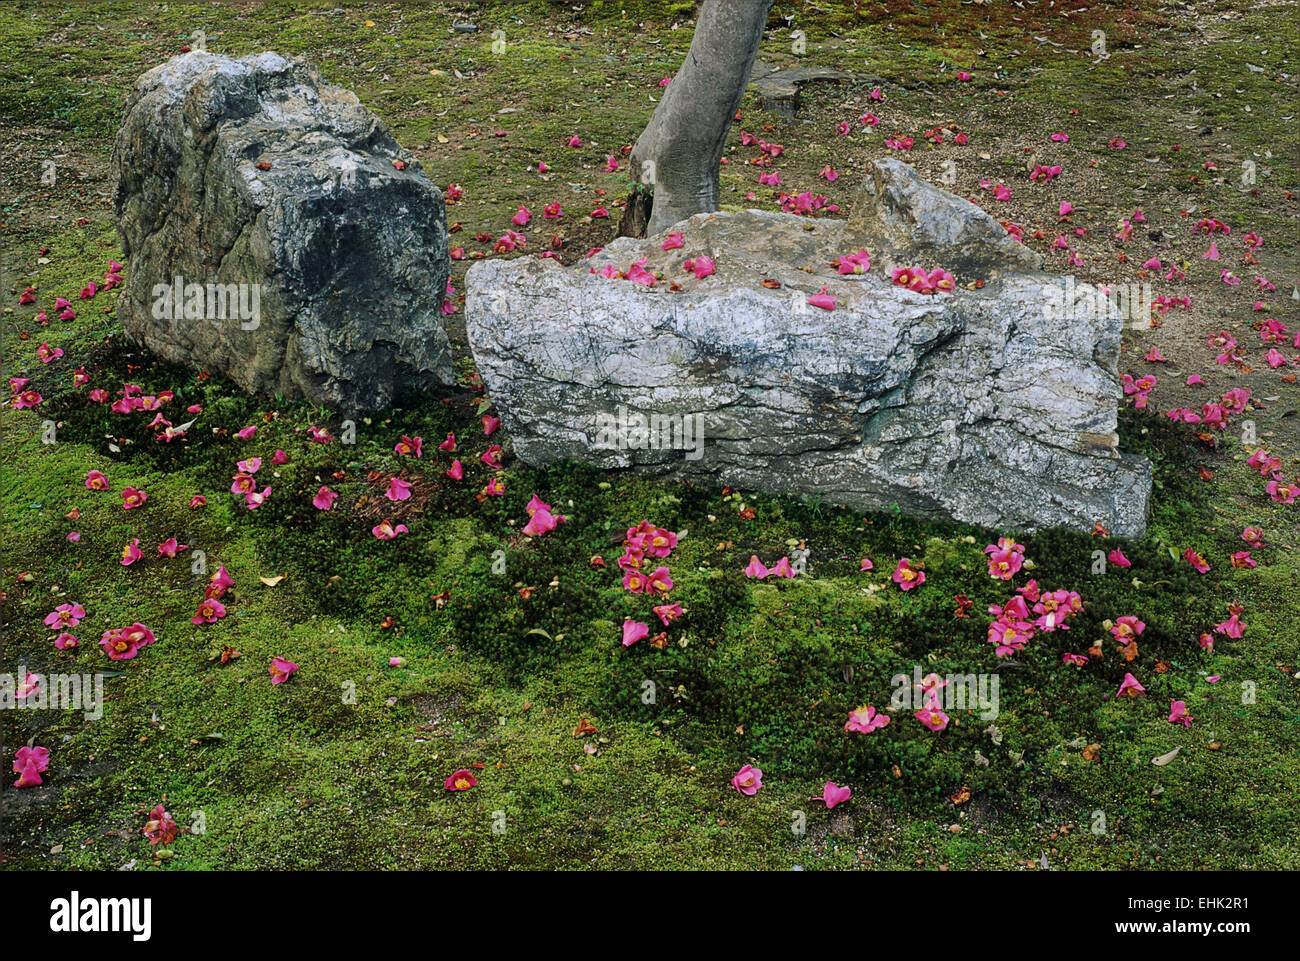 Camellia blossoms fall in a random pattern on a mossy  field beside a stone and create a very Zen like atmosphere. Stock Photo